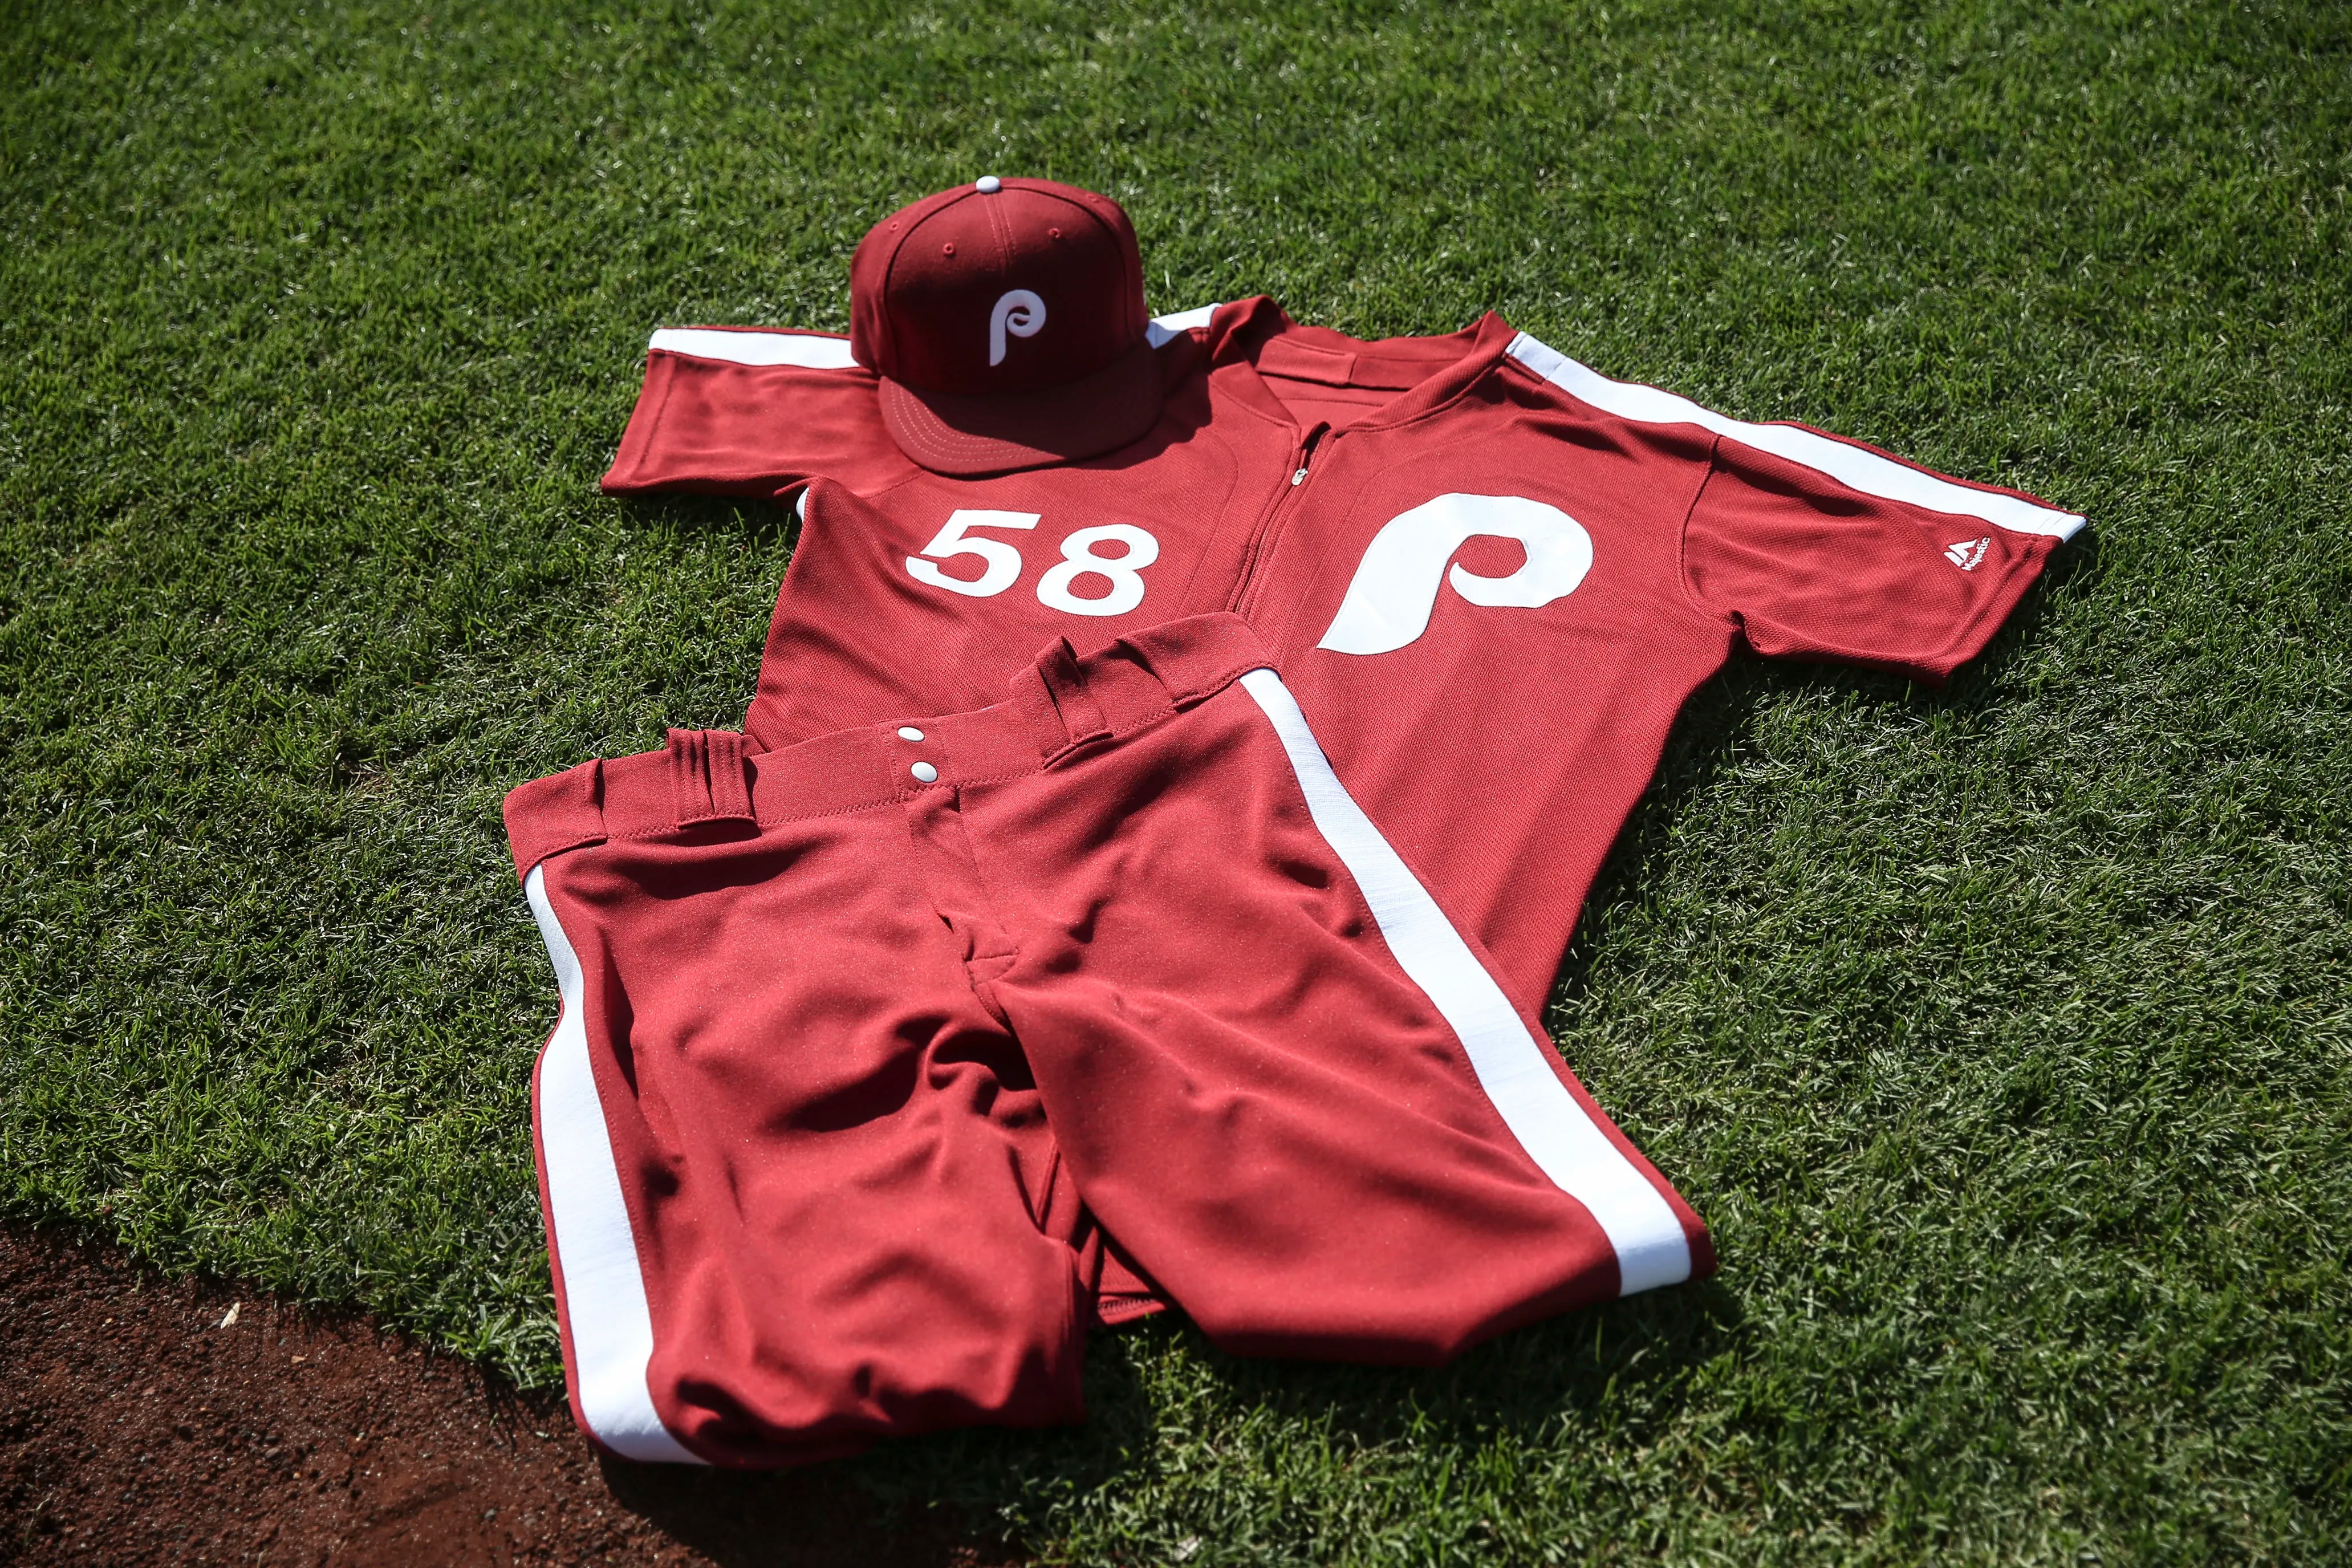 This weekend, the Phillies are bringing back the burgundy uniforms that  were so ugly the players trashed them